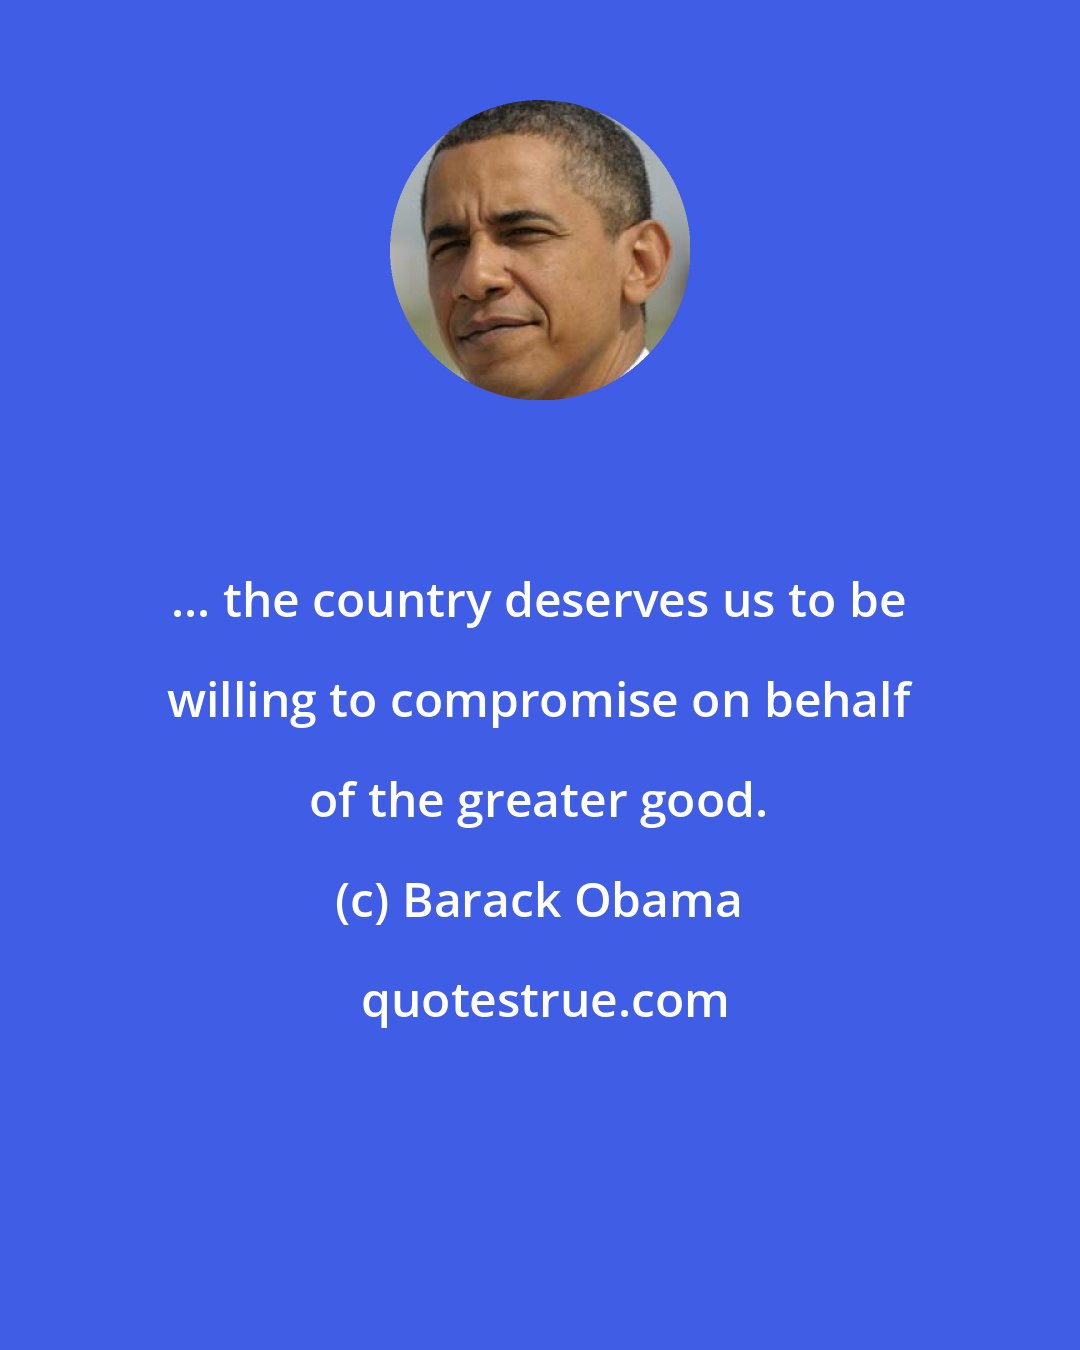 Barack Obama: ... the country deserves us to be willing to compromise on behalf of the greater good.